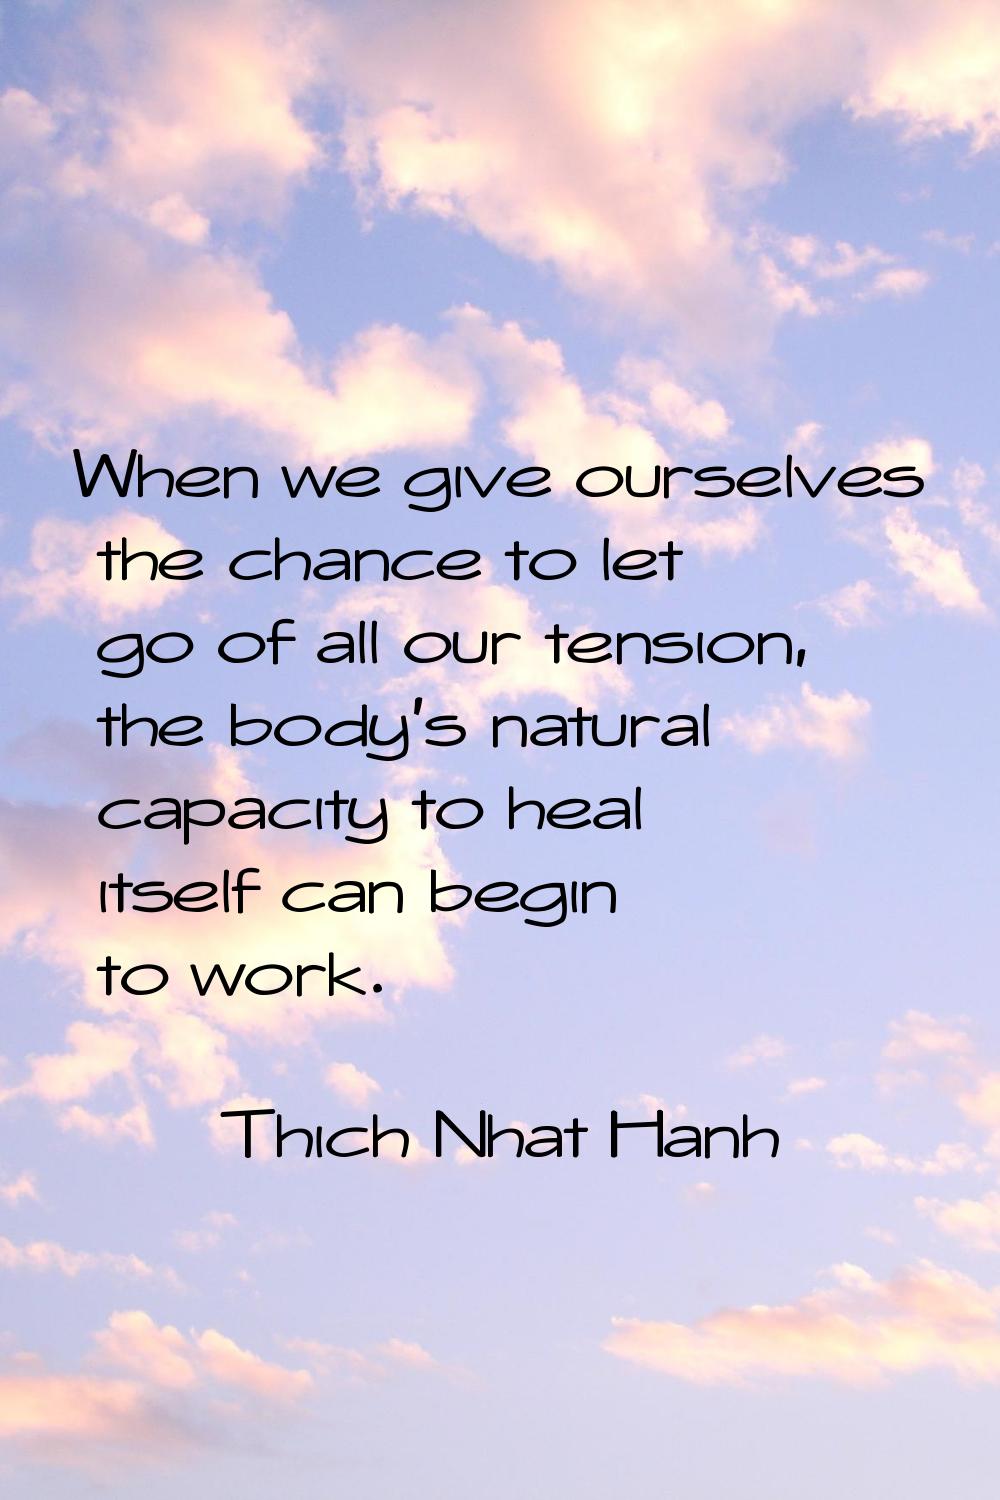 When we give ourselves the chance to let go of all our tension, the body's natural capacity to heal